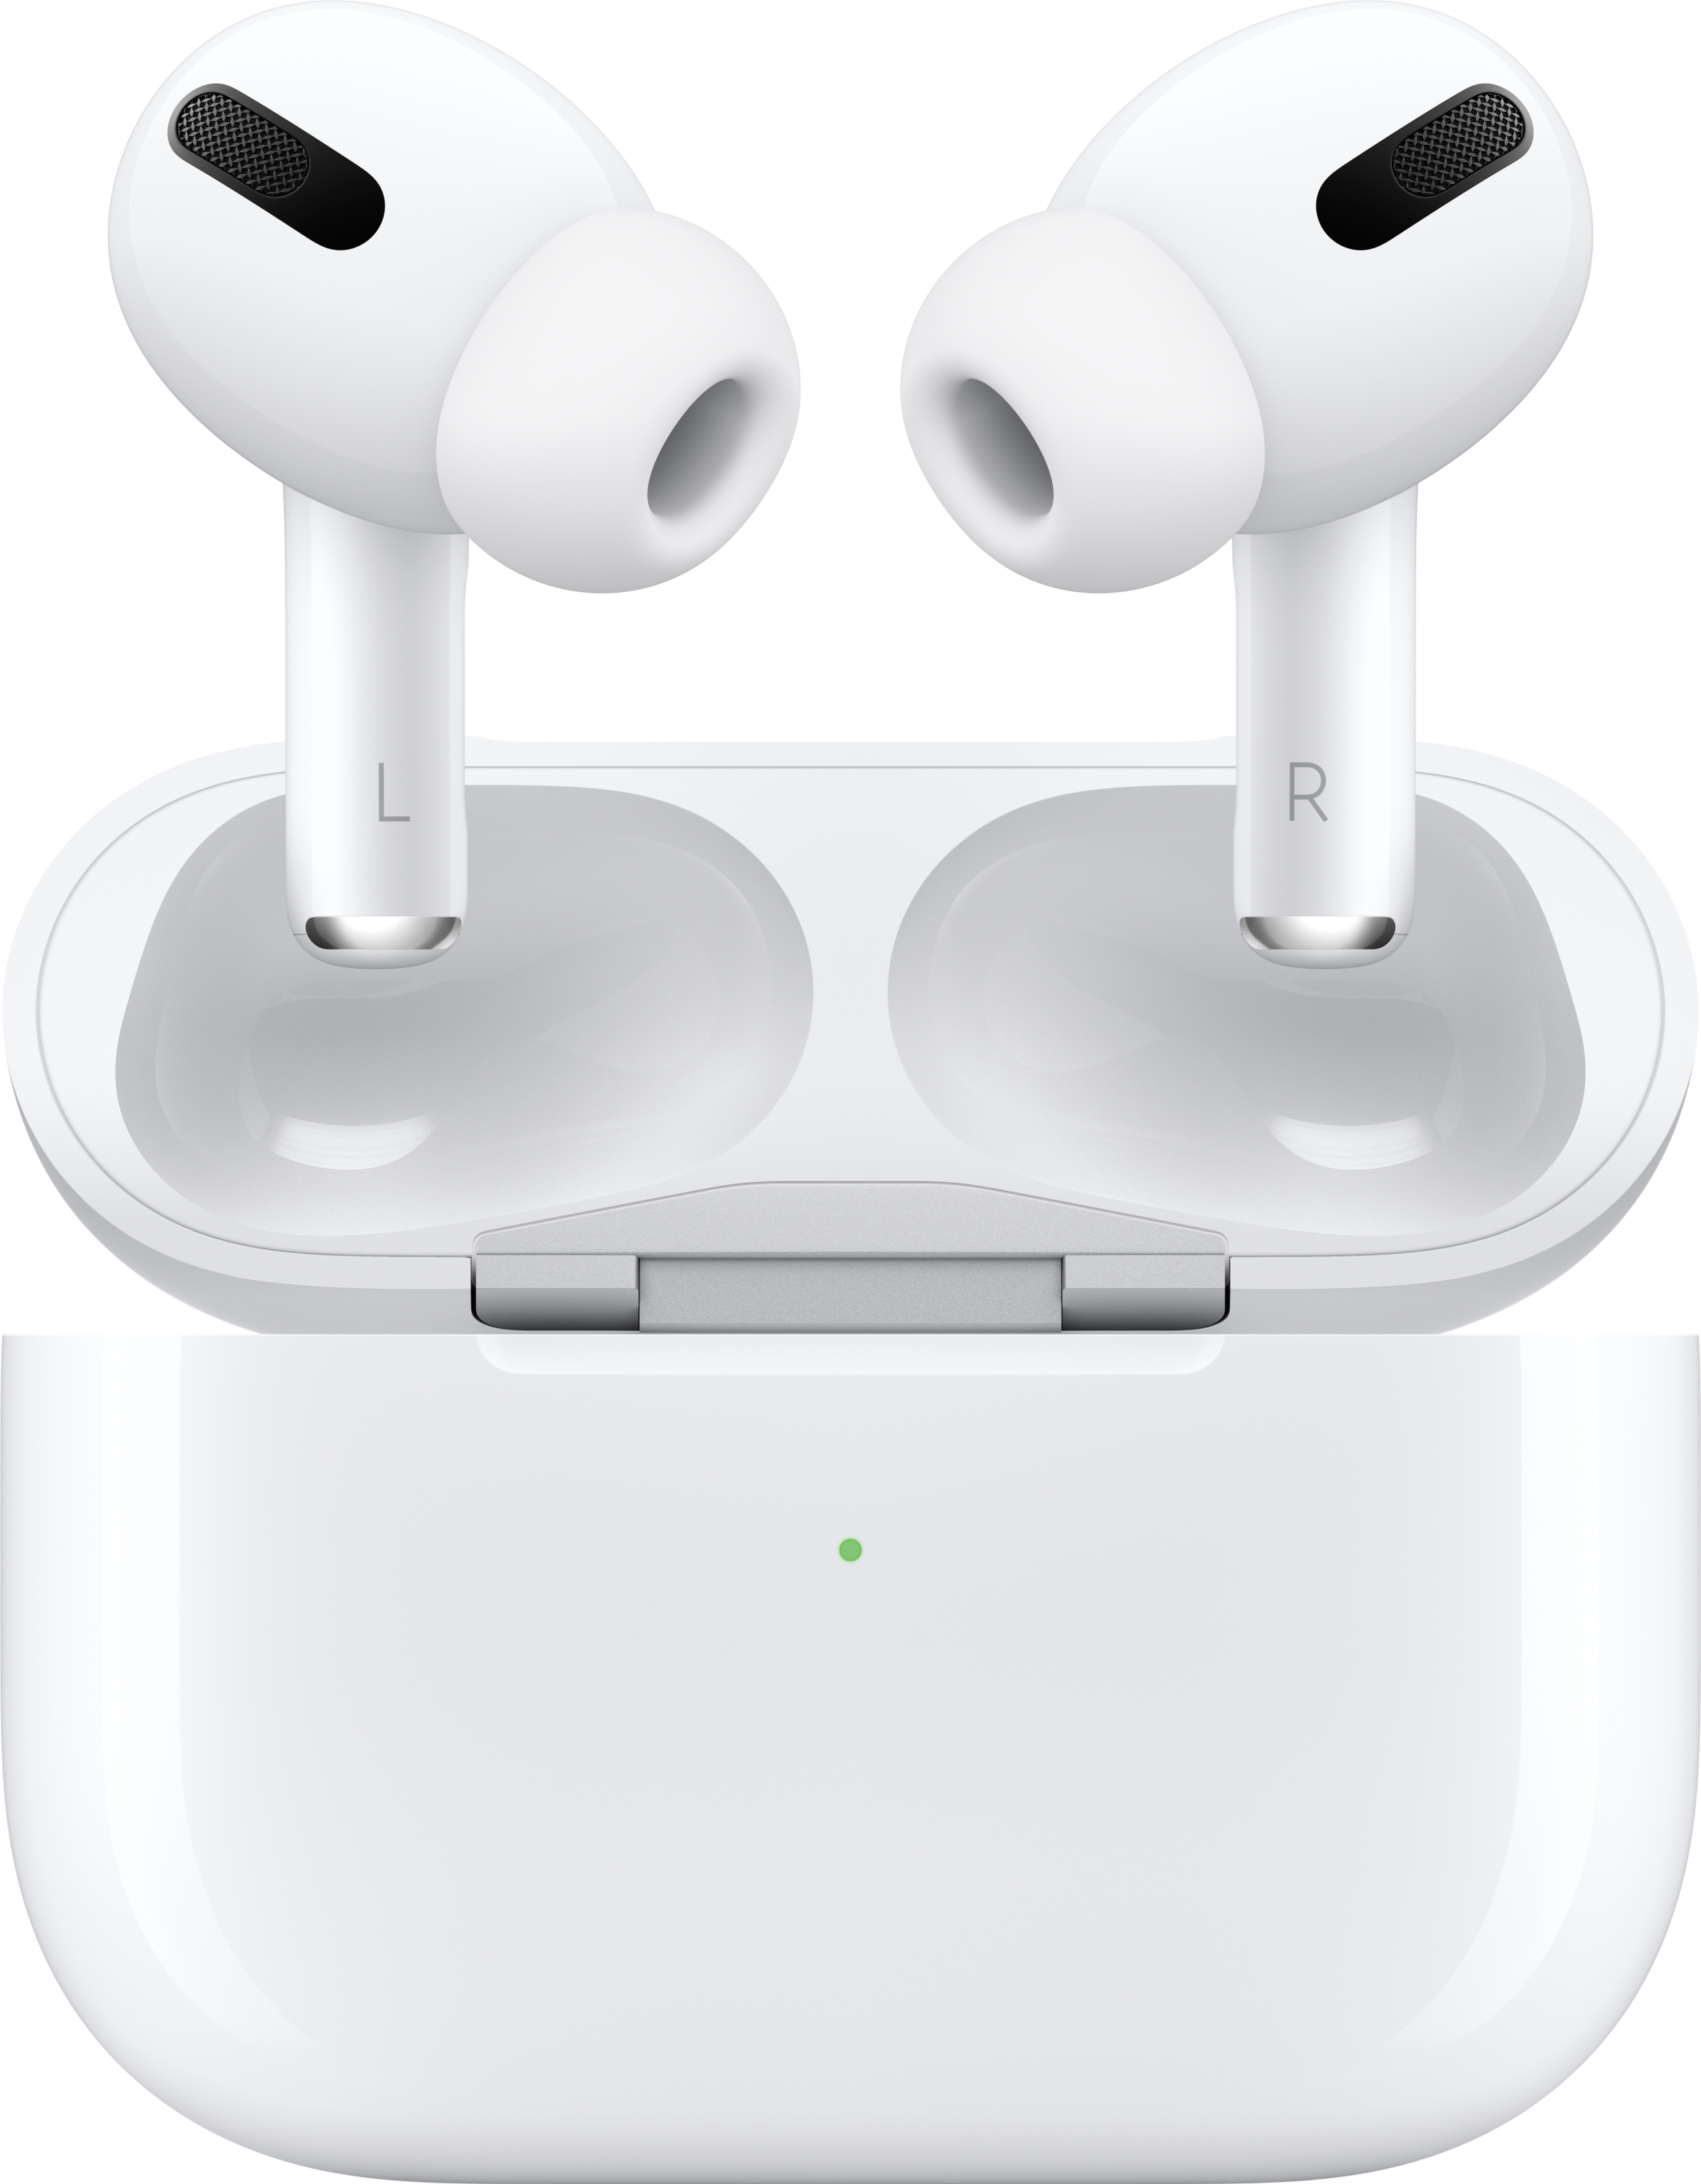 Apple AirPods Pro Active Noise Canceling Earbuds with MagSafe Charging Case  | Sweetwater